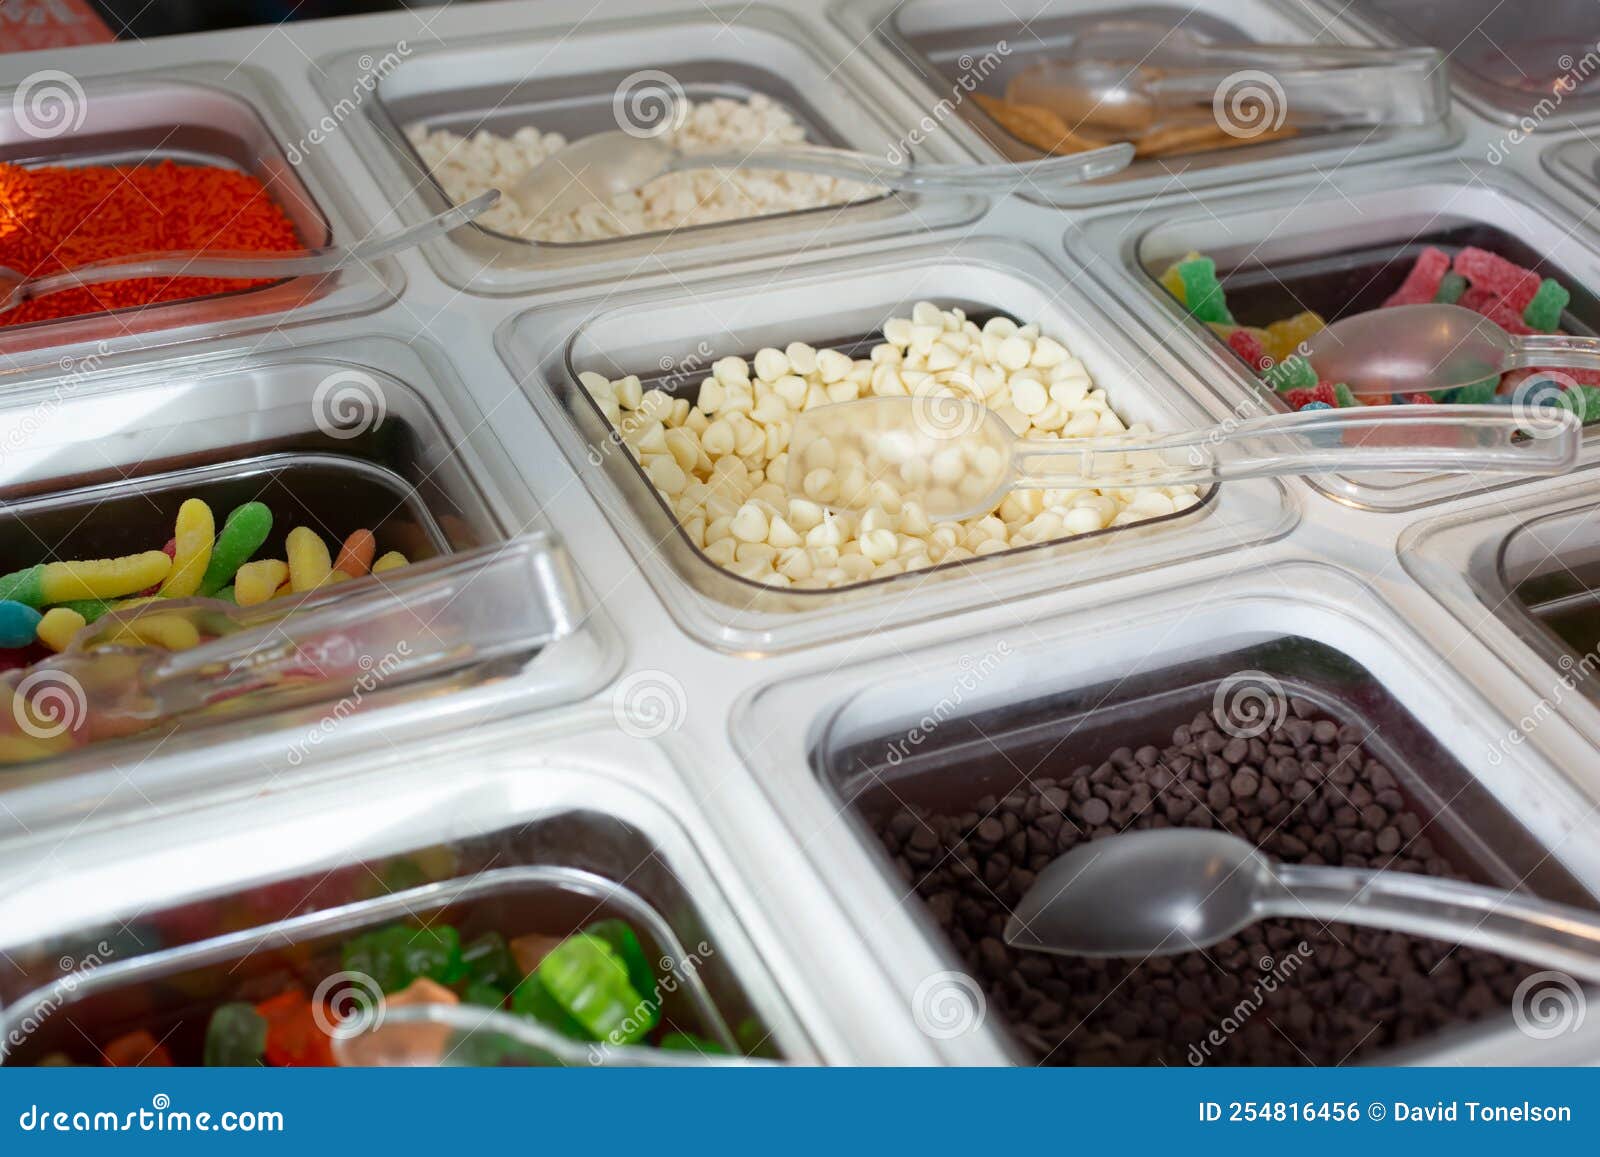 Table of Toppings for Frozen Yogurt or Ice Cream Stock Photo